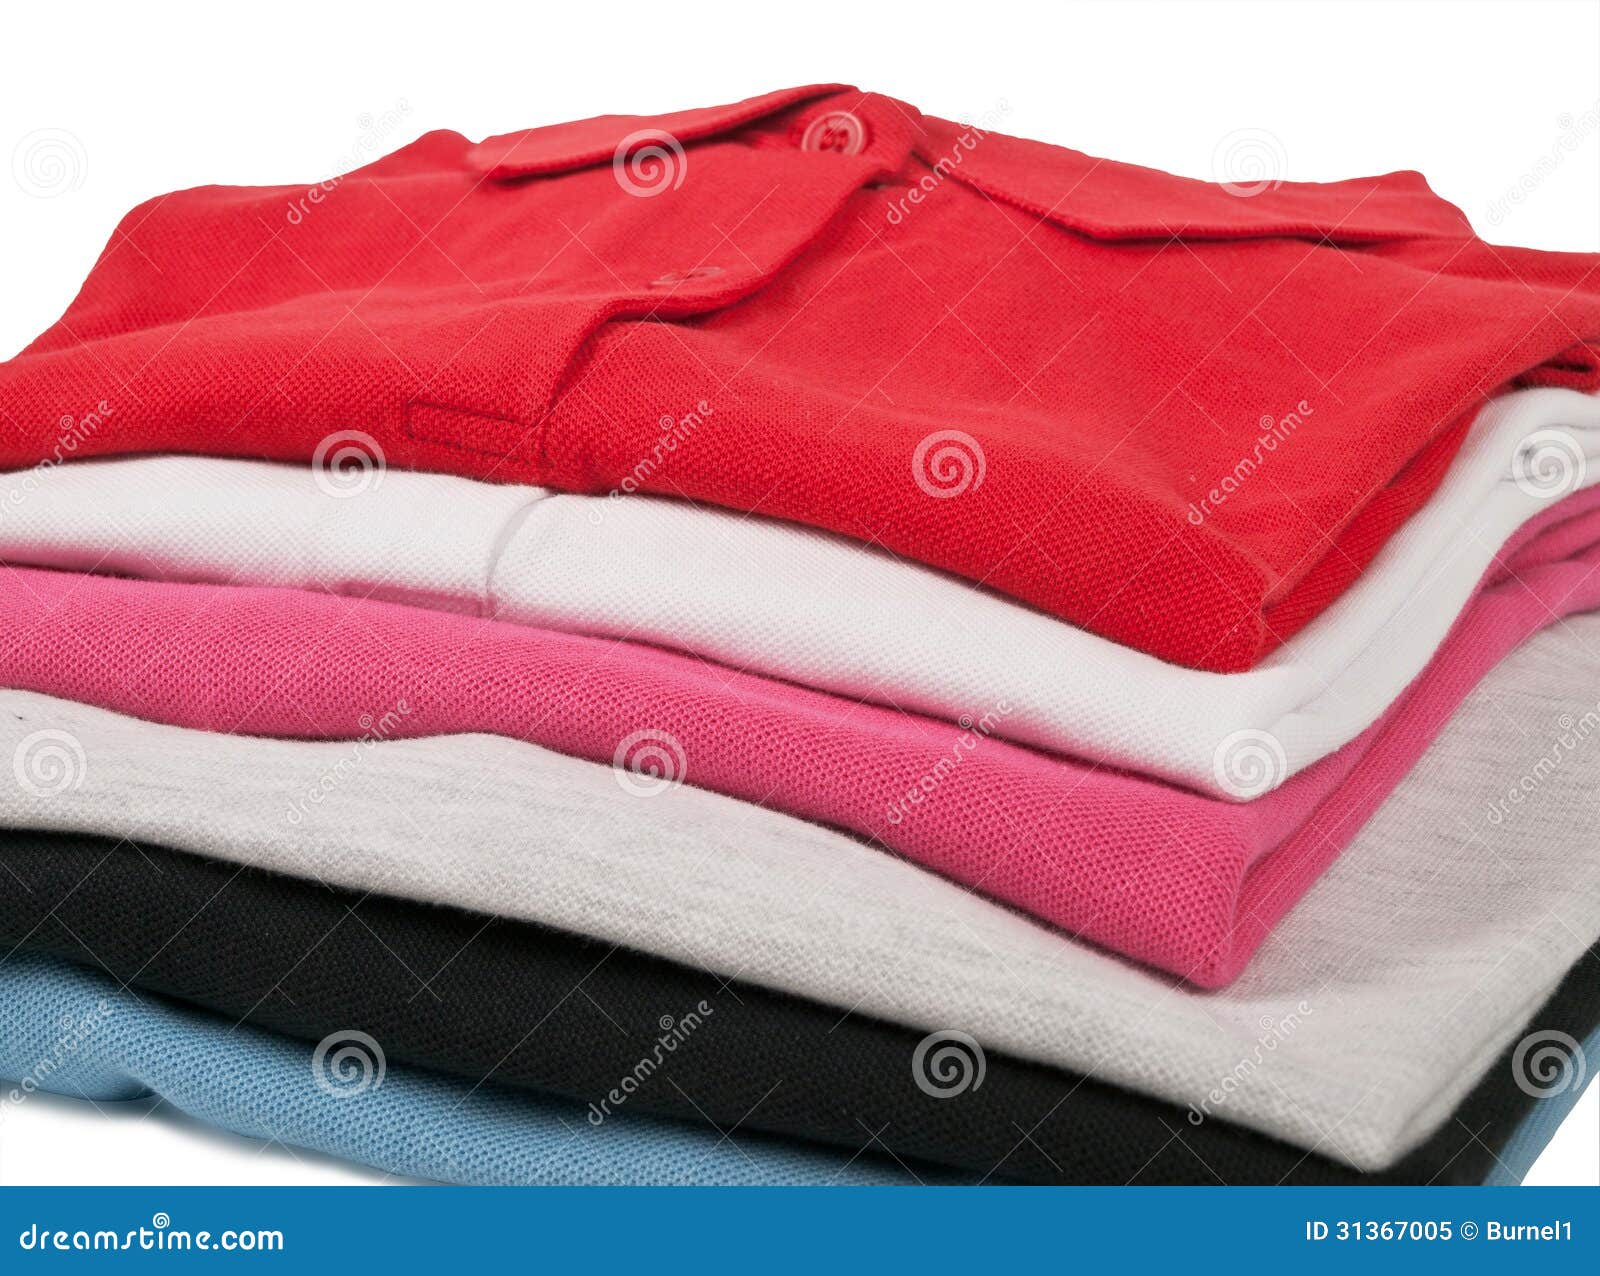 Colorful Polo T-shirts Royalty Free Stock Photo - Image: 31367005